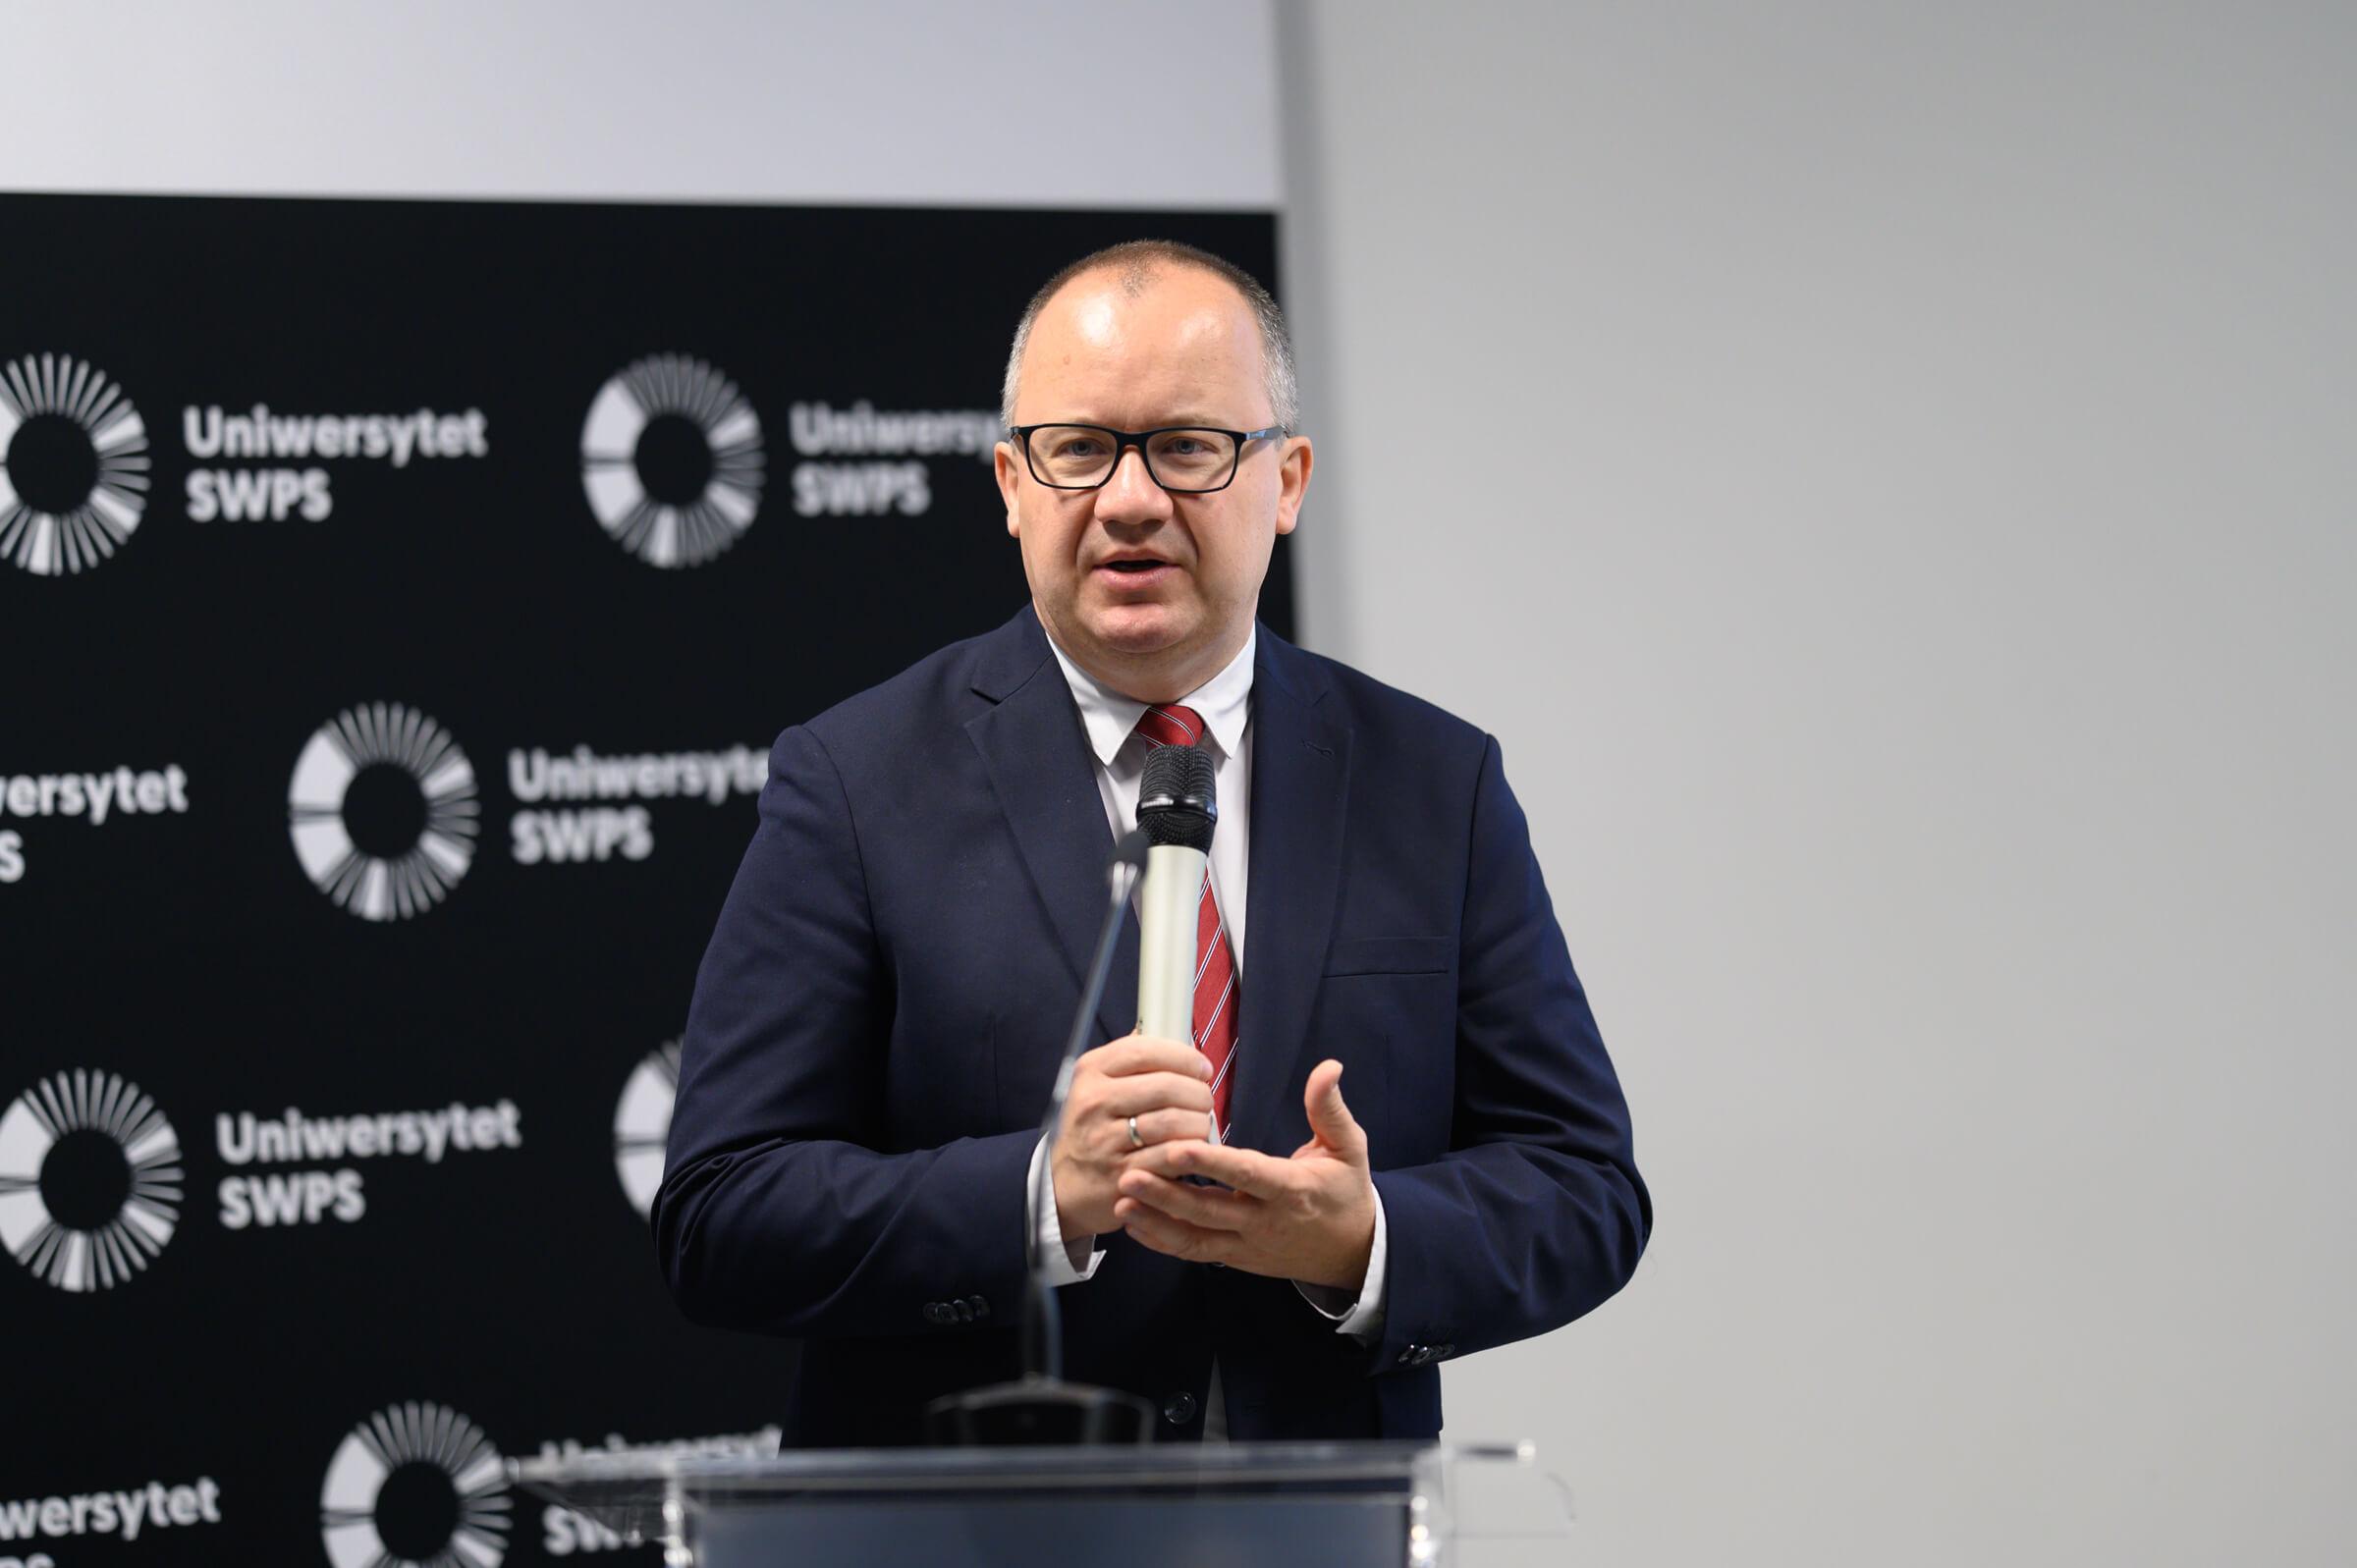 Dean of the Faculty of Law in Warsaw at SWPS University, Prof. Adam Bodnar, gives a speech at the opening of the Vis Moot Bootcamp training in Warsaw, Poland.